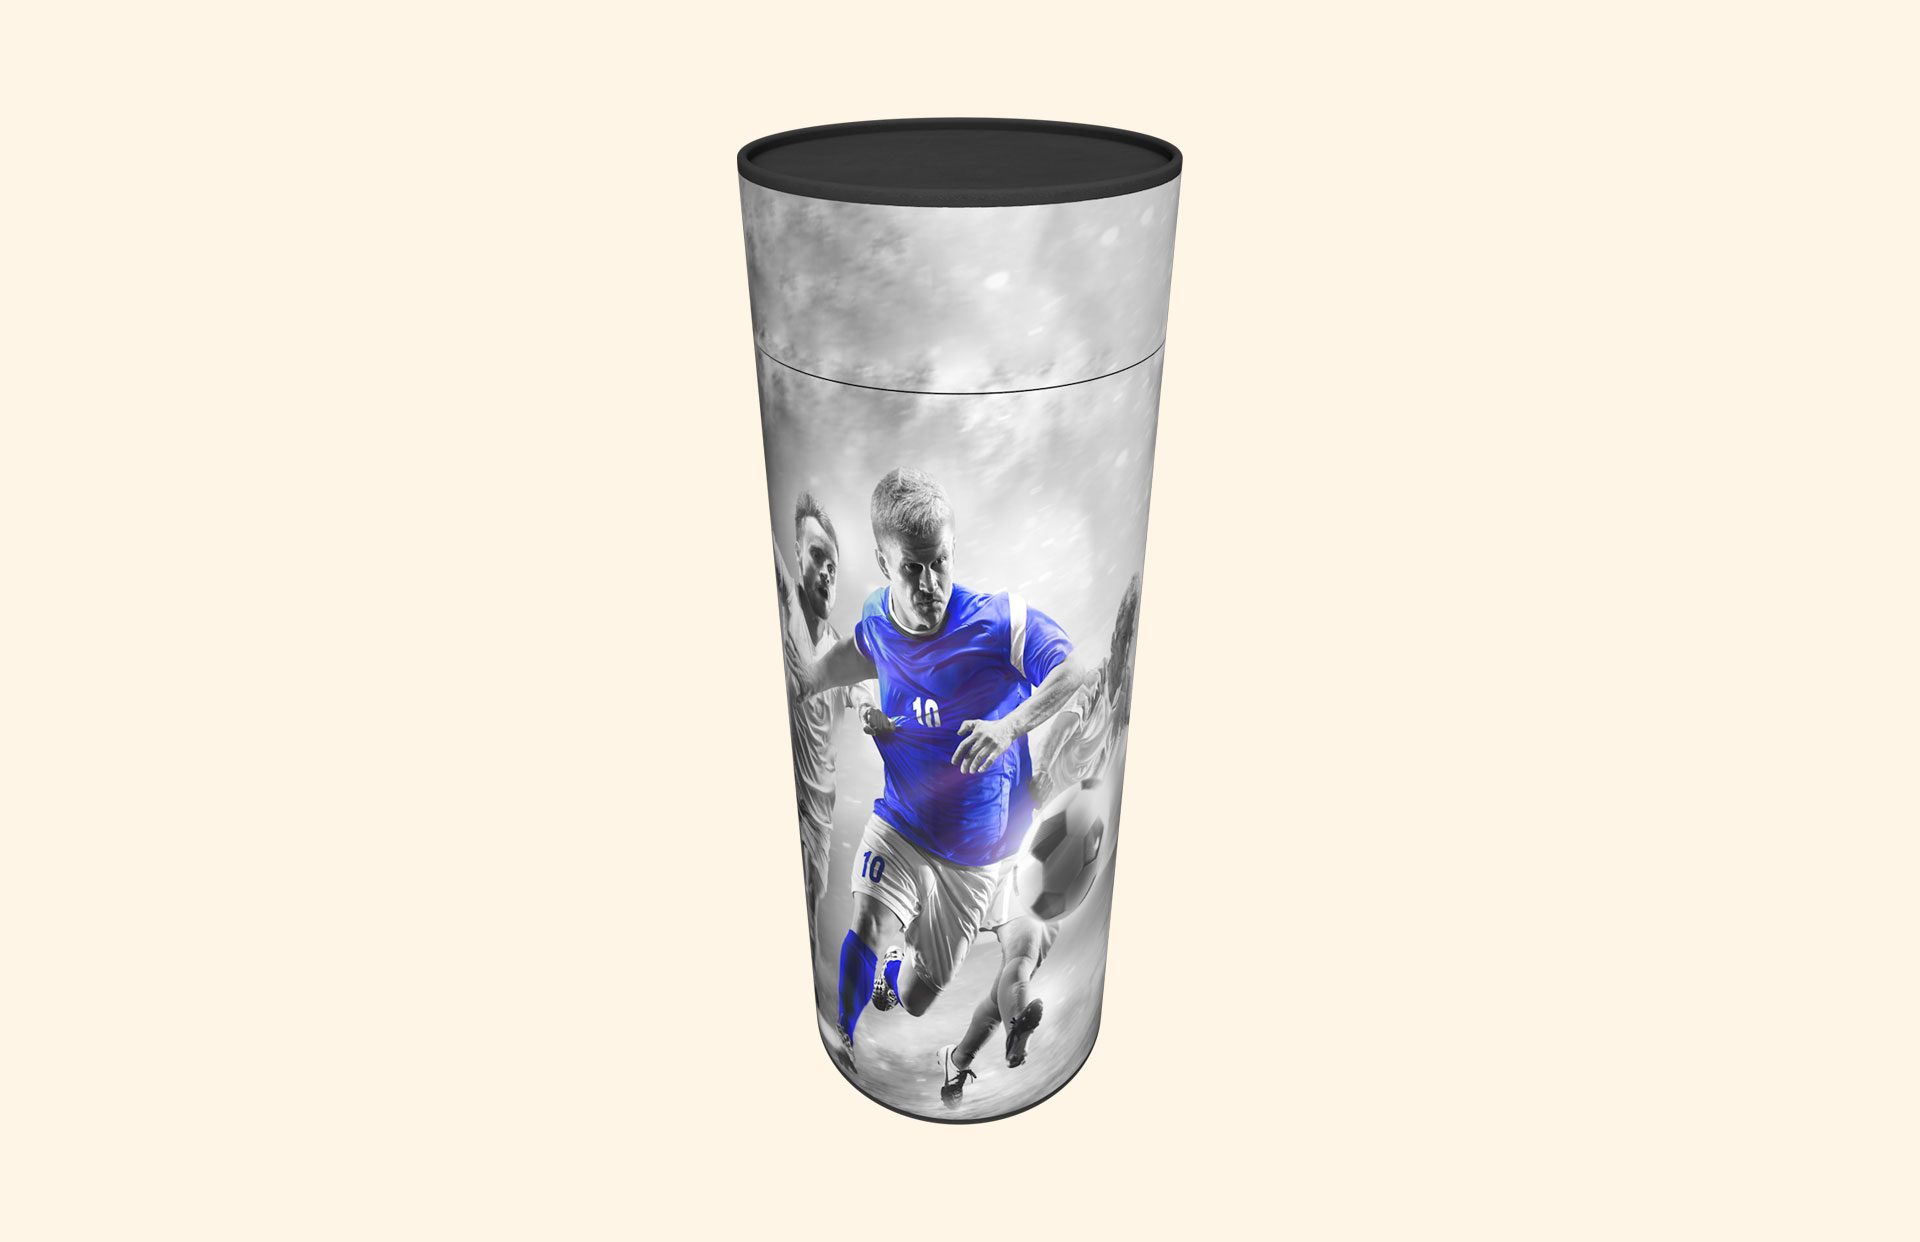 Standing Out Player in blue scatter tube